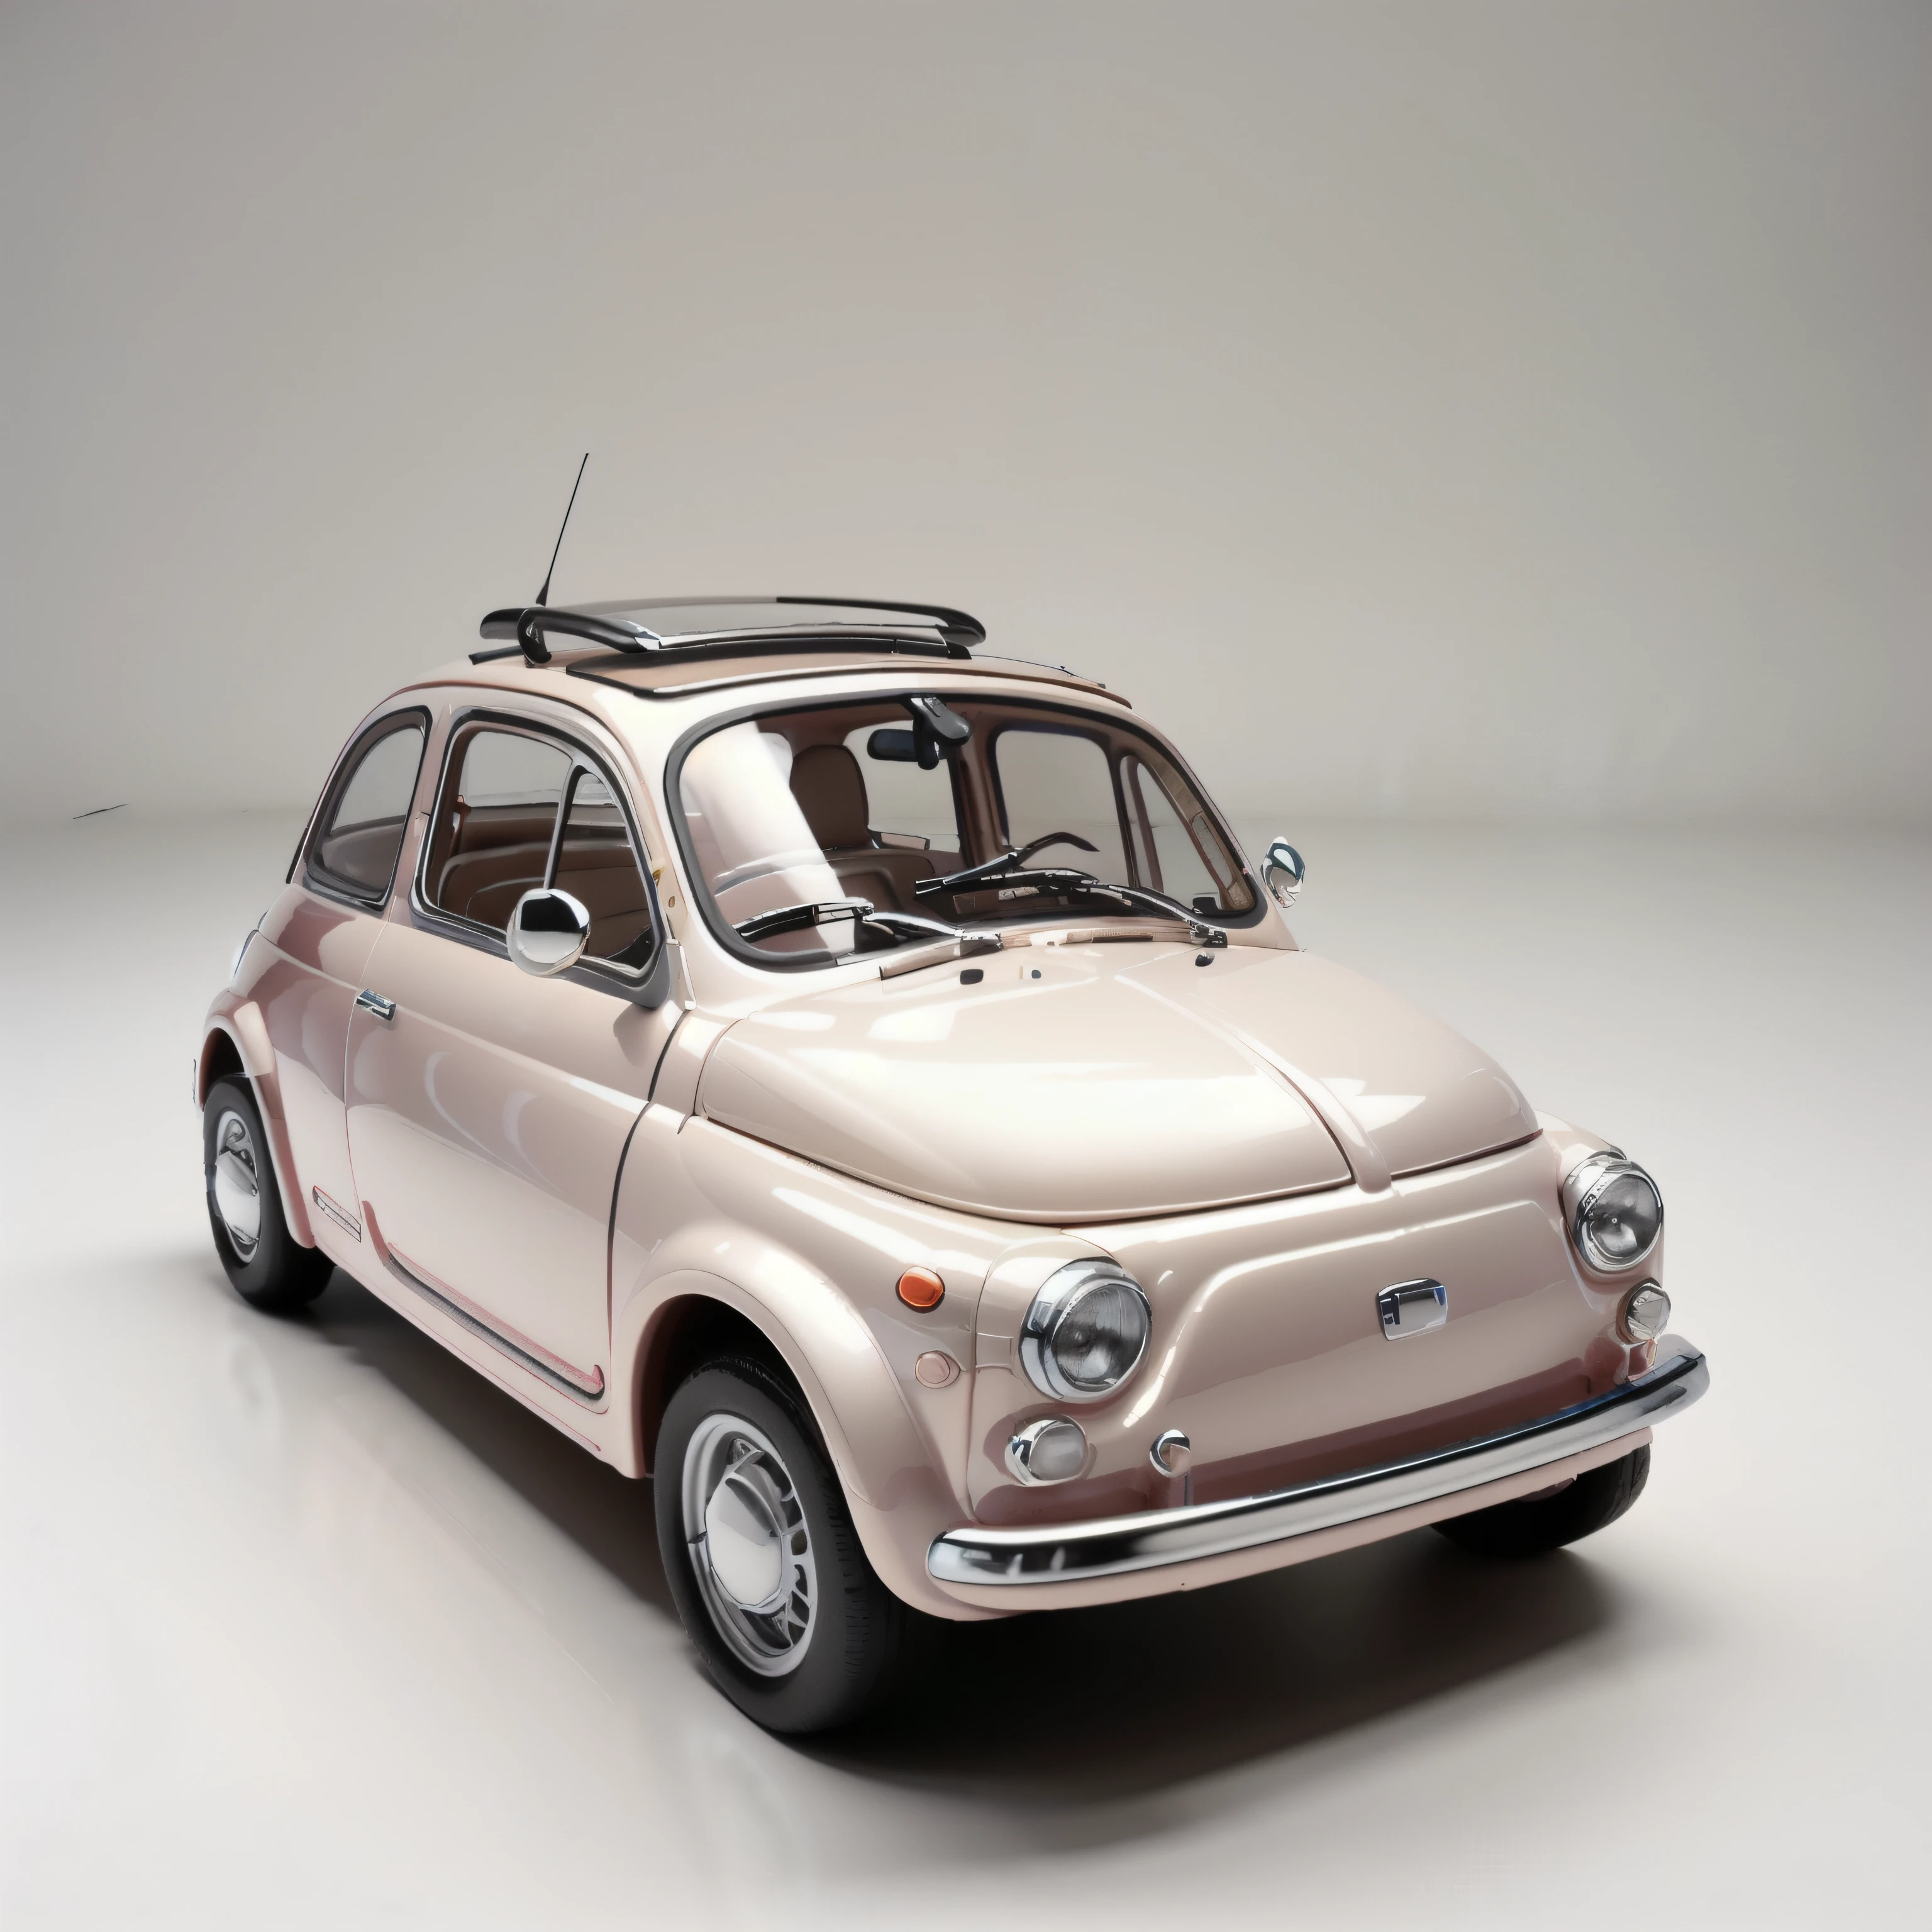 (masterpiece,Highest quality,Highest quality,Very detailed),Cream-colored Fiat 500 plastic model,Isometric 3D diorama,Matte Paint